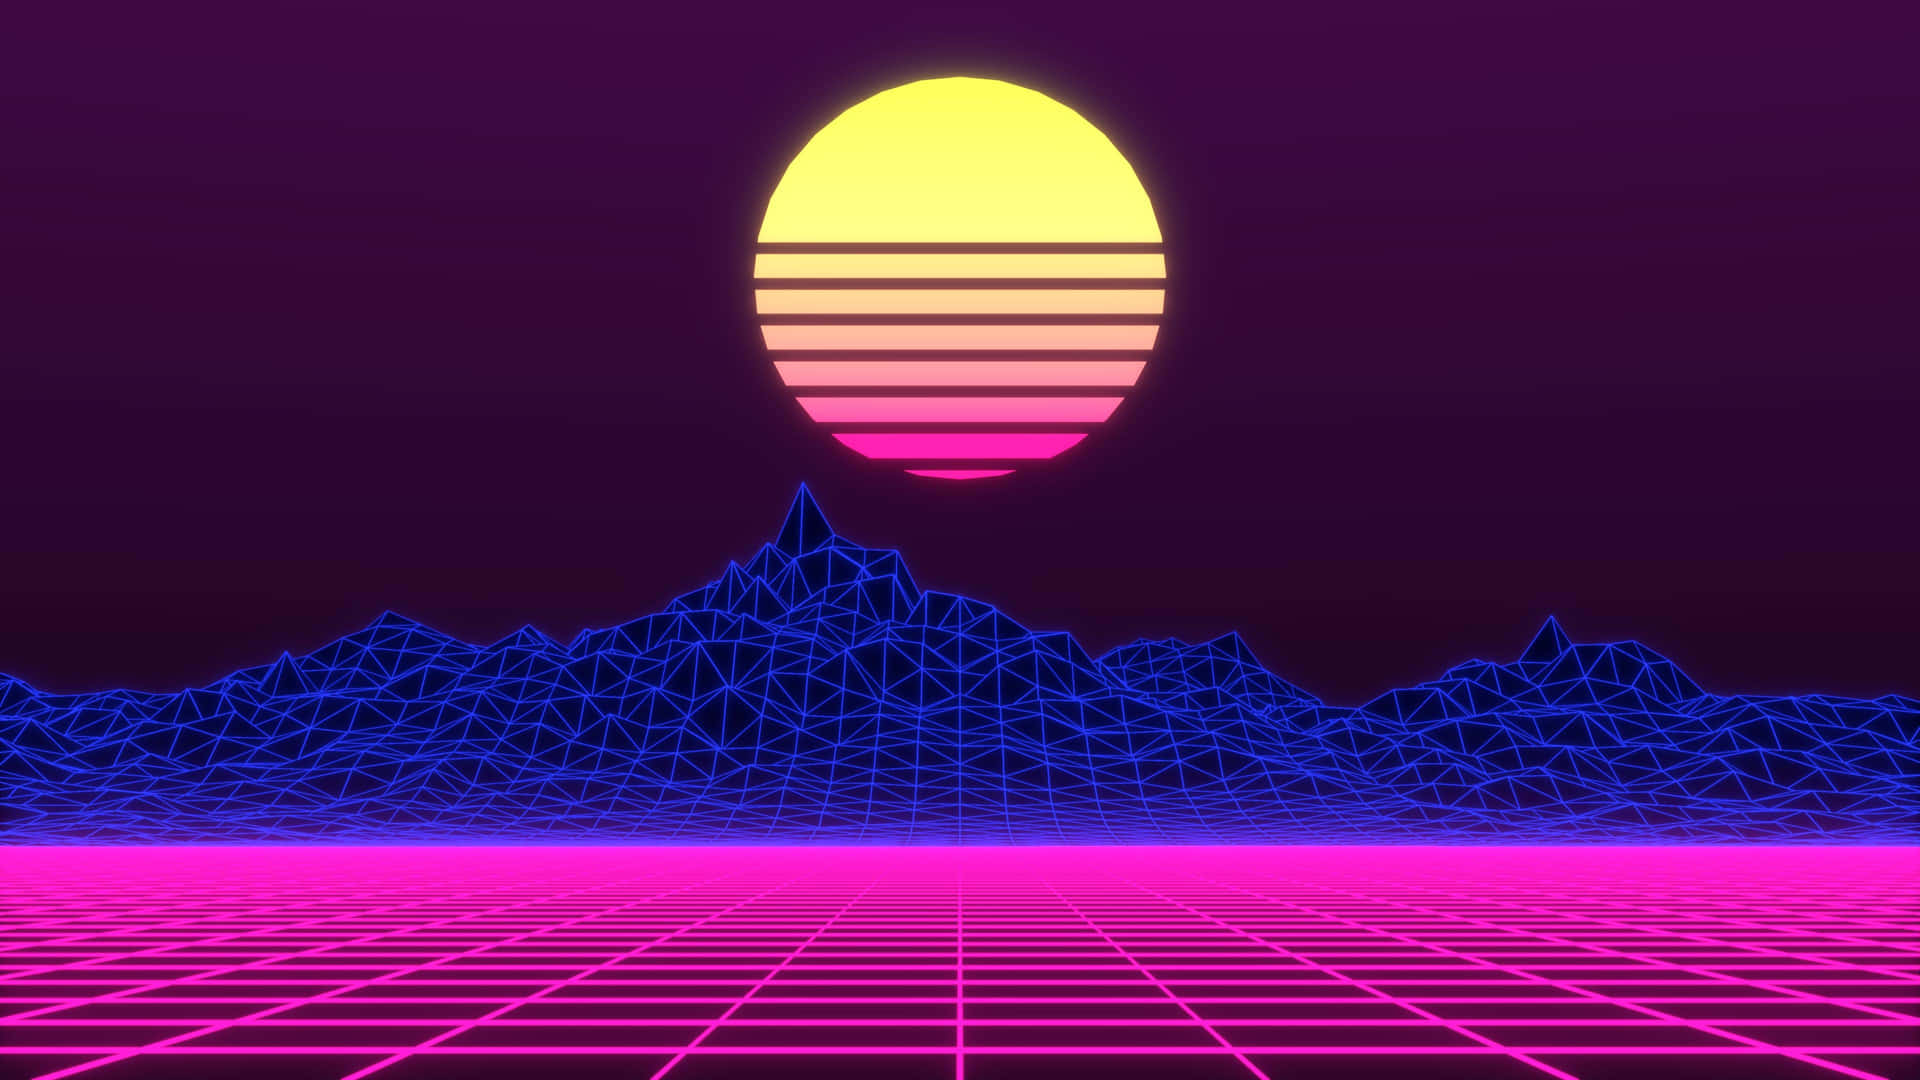 "Take a trip back to the 80s with this retro-inspired, neon-soaked background."